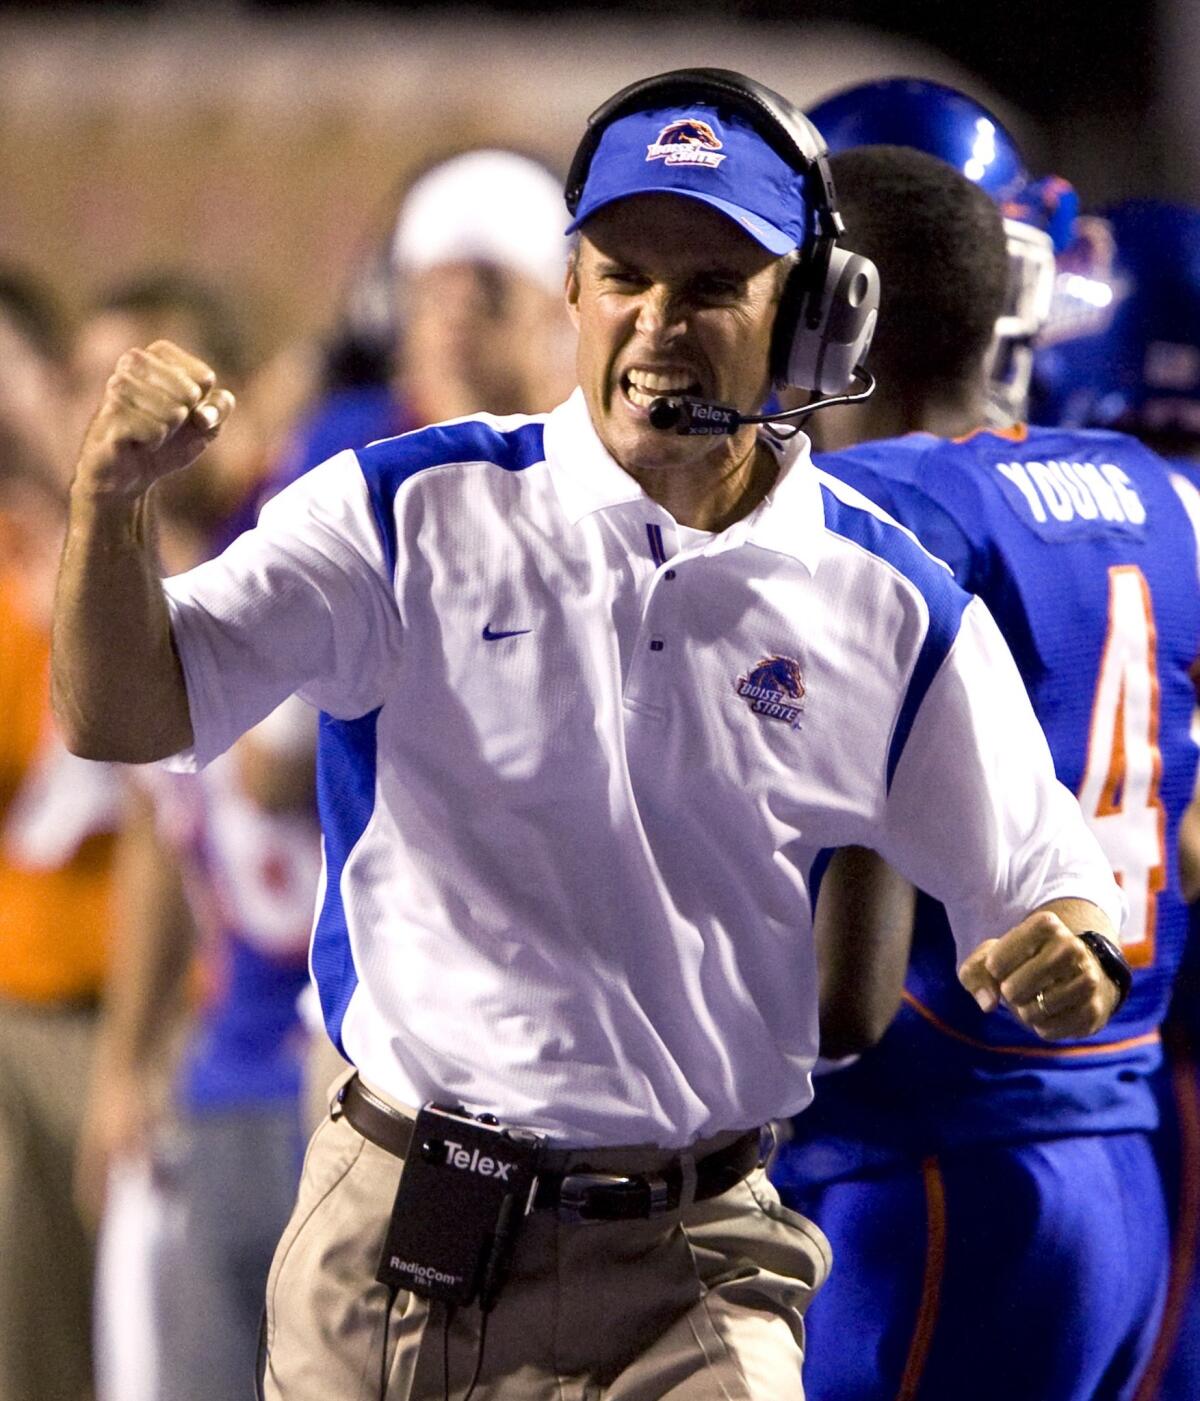 Chris Petersen takes over Washington's football program after tallying a 92-12 record in eight seasons at Boise State.